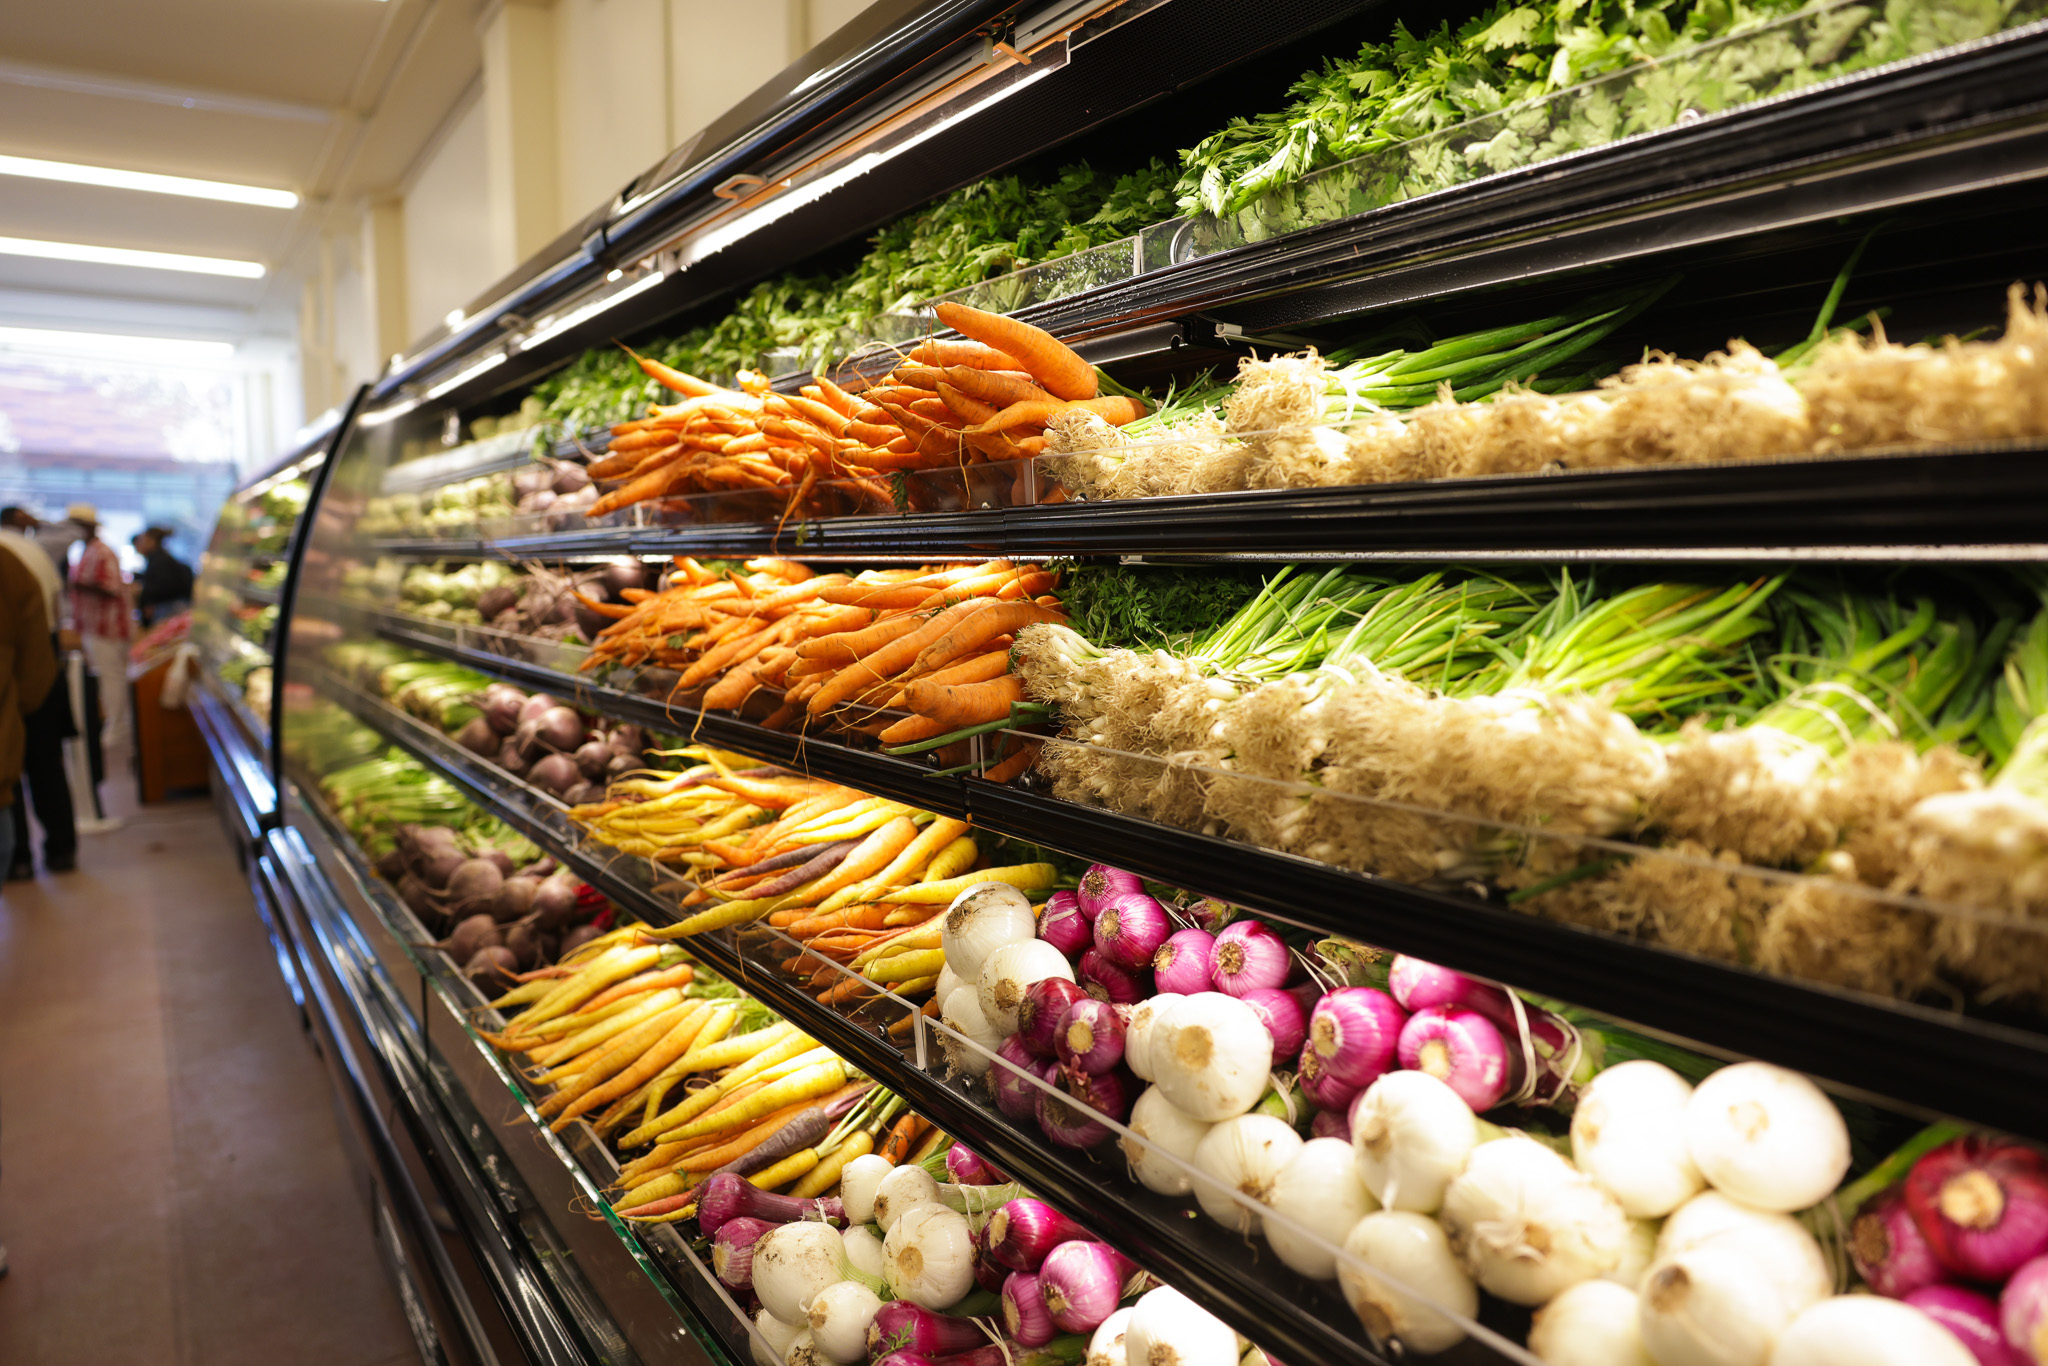 A grocery store produce section with neatly stacked vegetables, including carrots, turnips, radishes, and greens, on shelves under bright lighting.